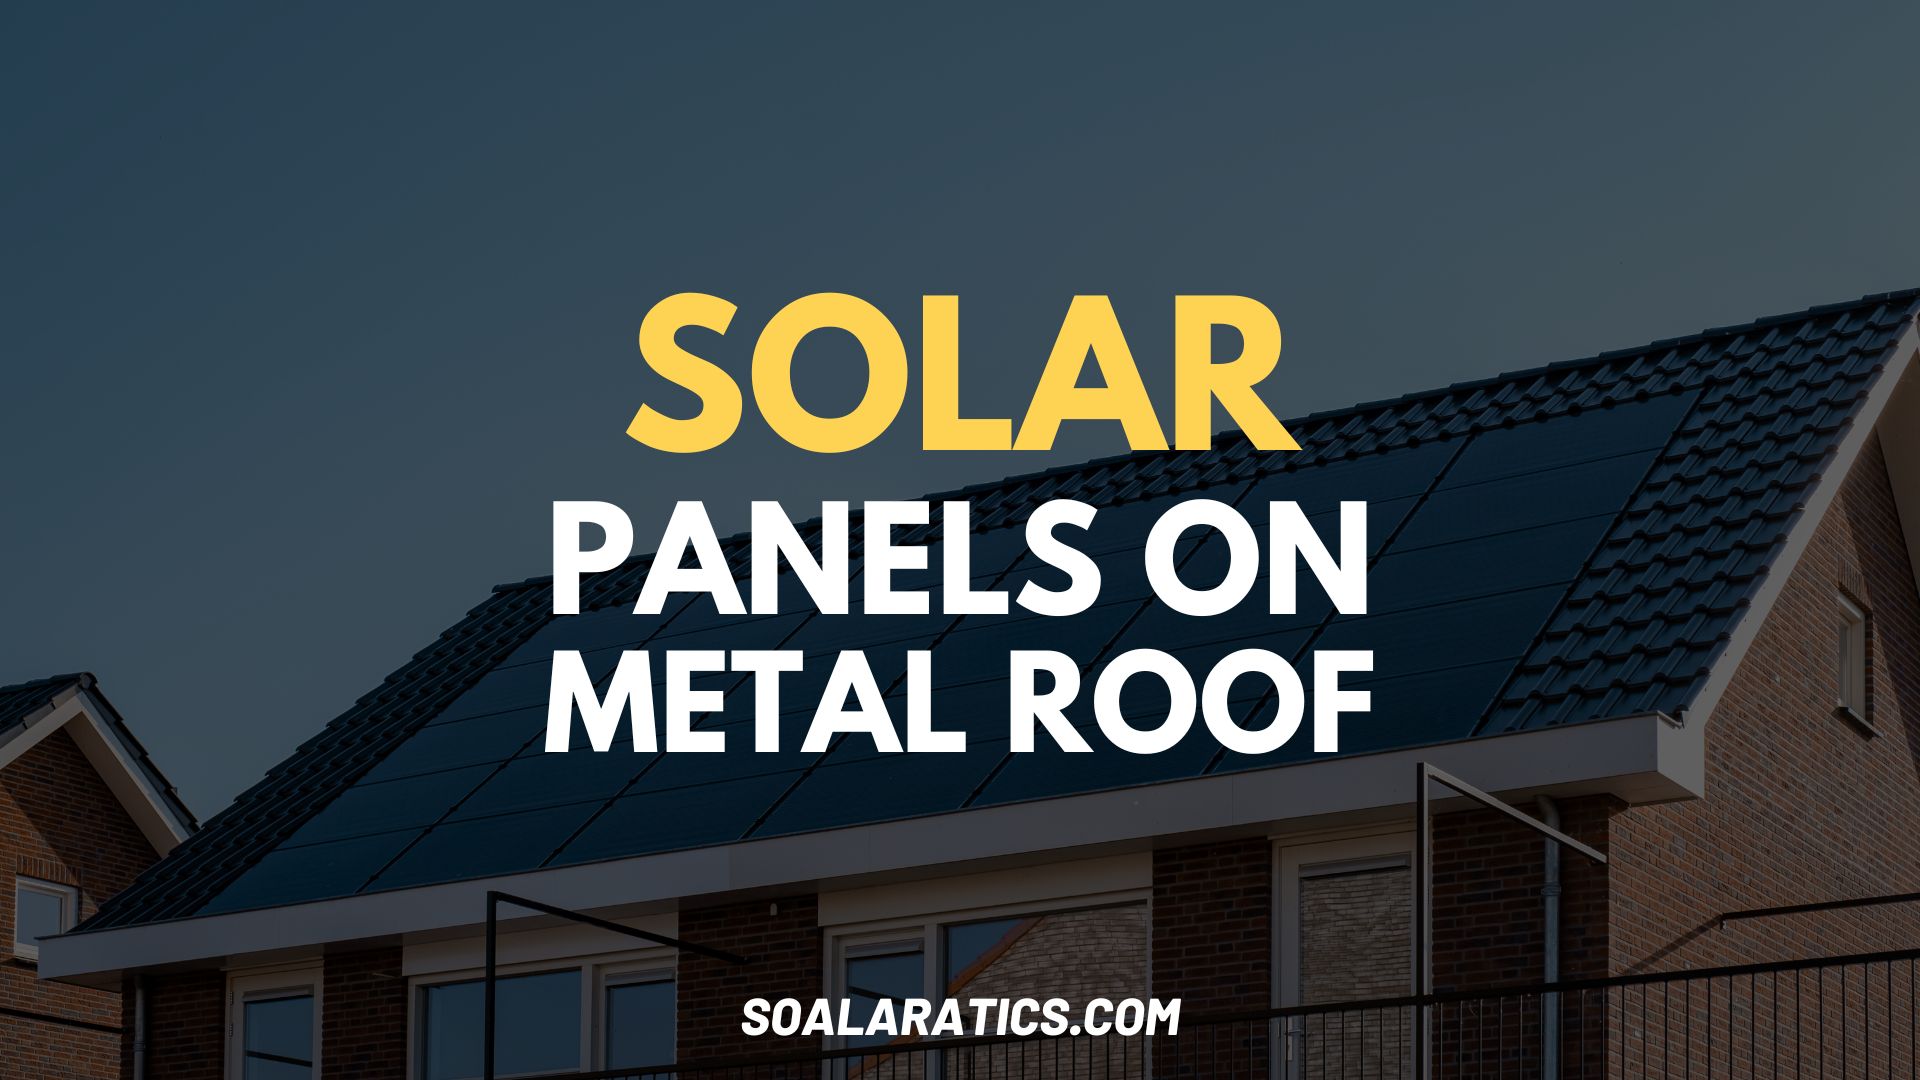 Can You Install Solar Panels on Metal Roof? (Cost & Advanteges)